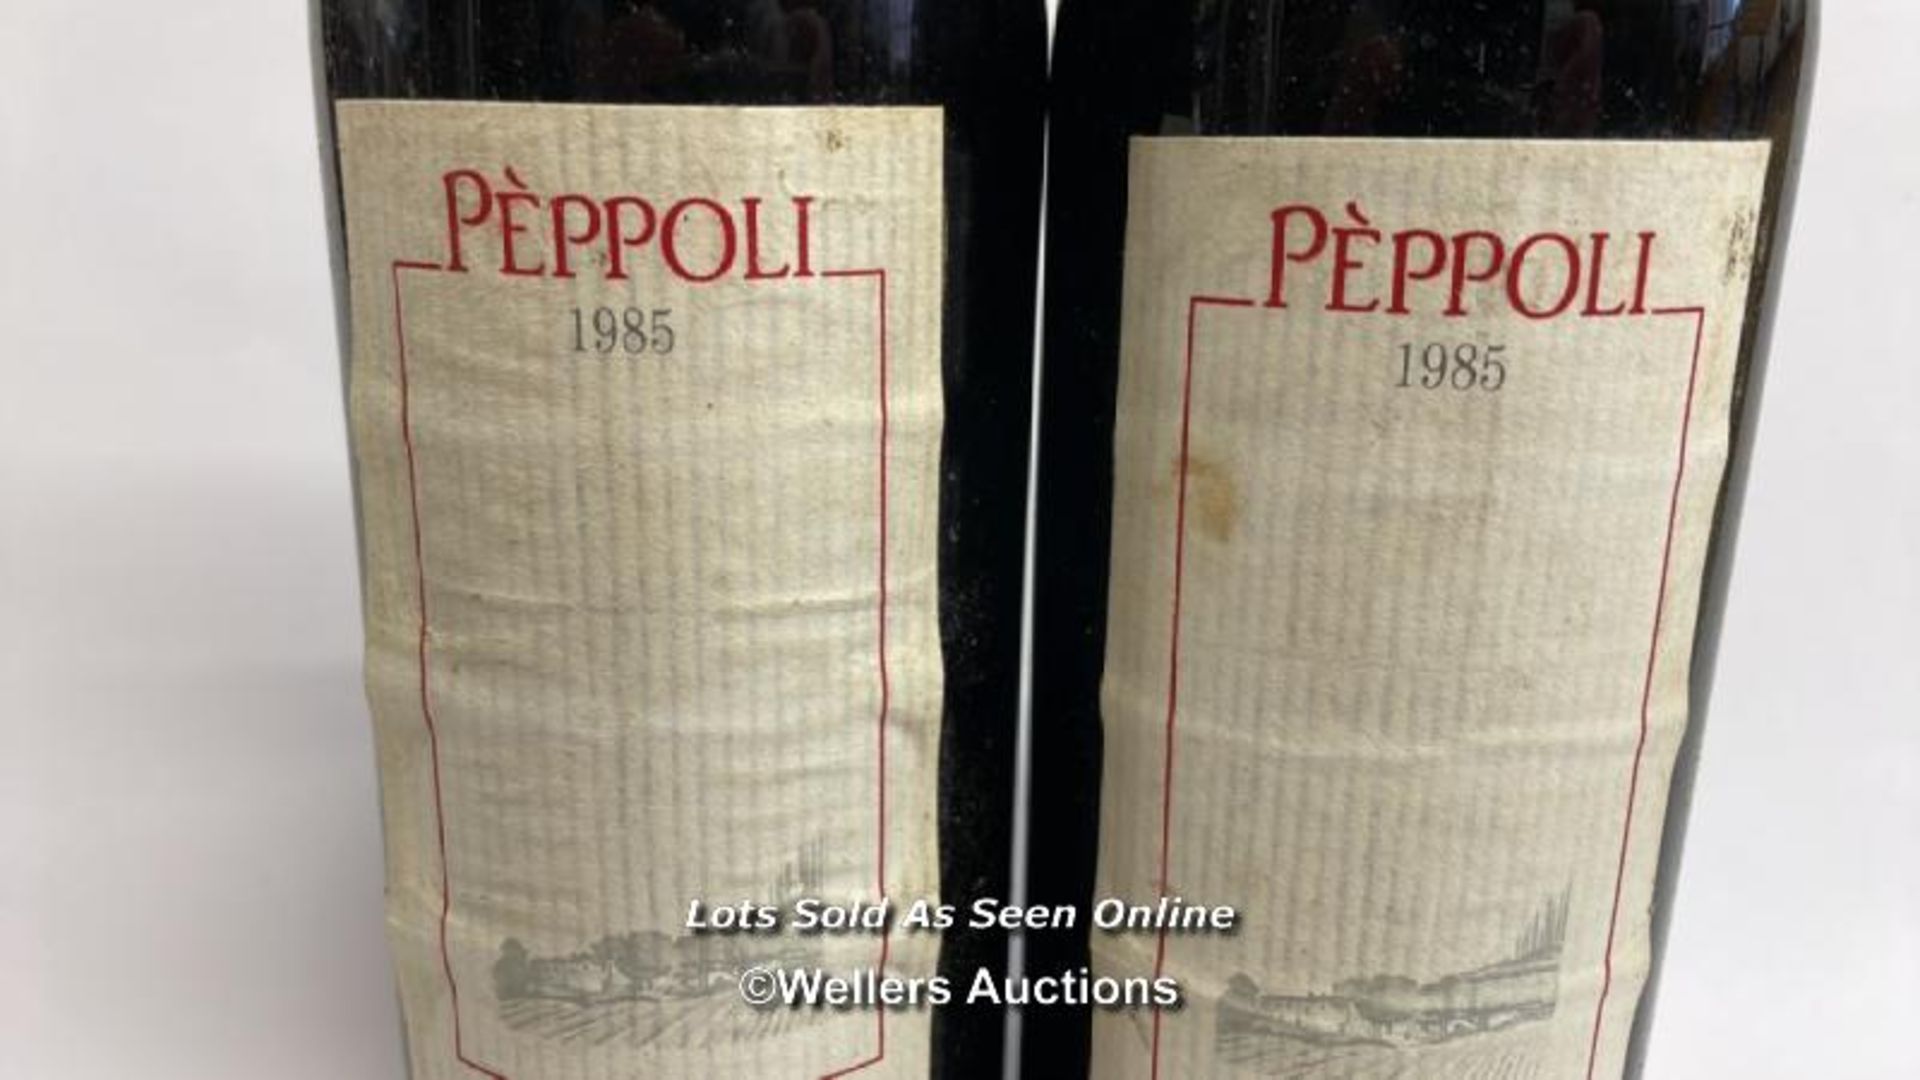 Two bottles of 1985 Peppoli Chianti Classico, 75cl, 13% vol / Please see images for fill level and - Image 3 of 5